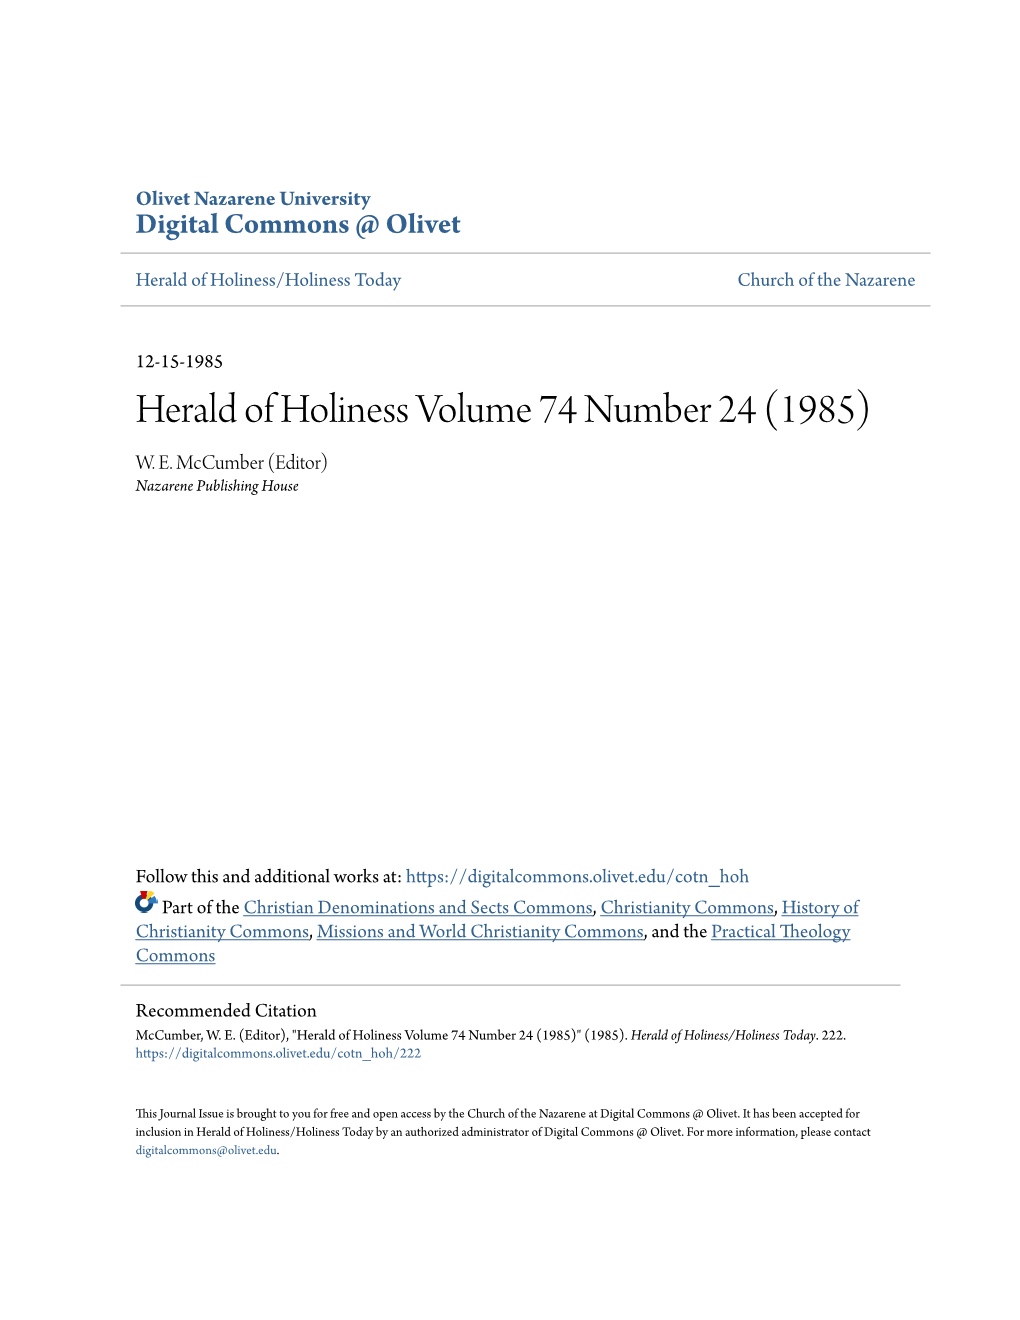 Herald of Holiness Volume 74 Number 24 (1985) W